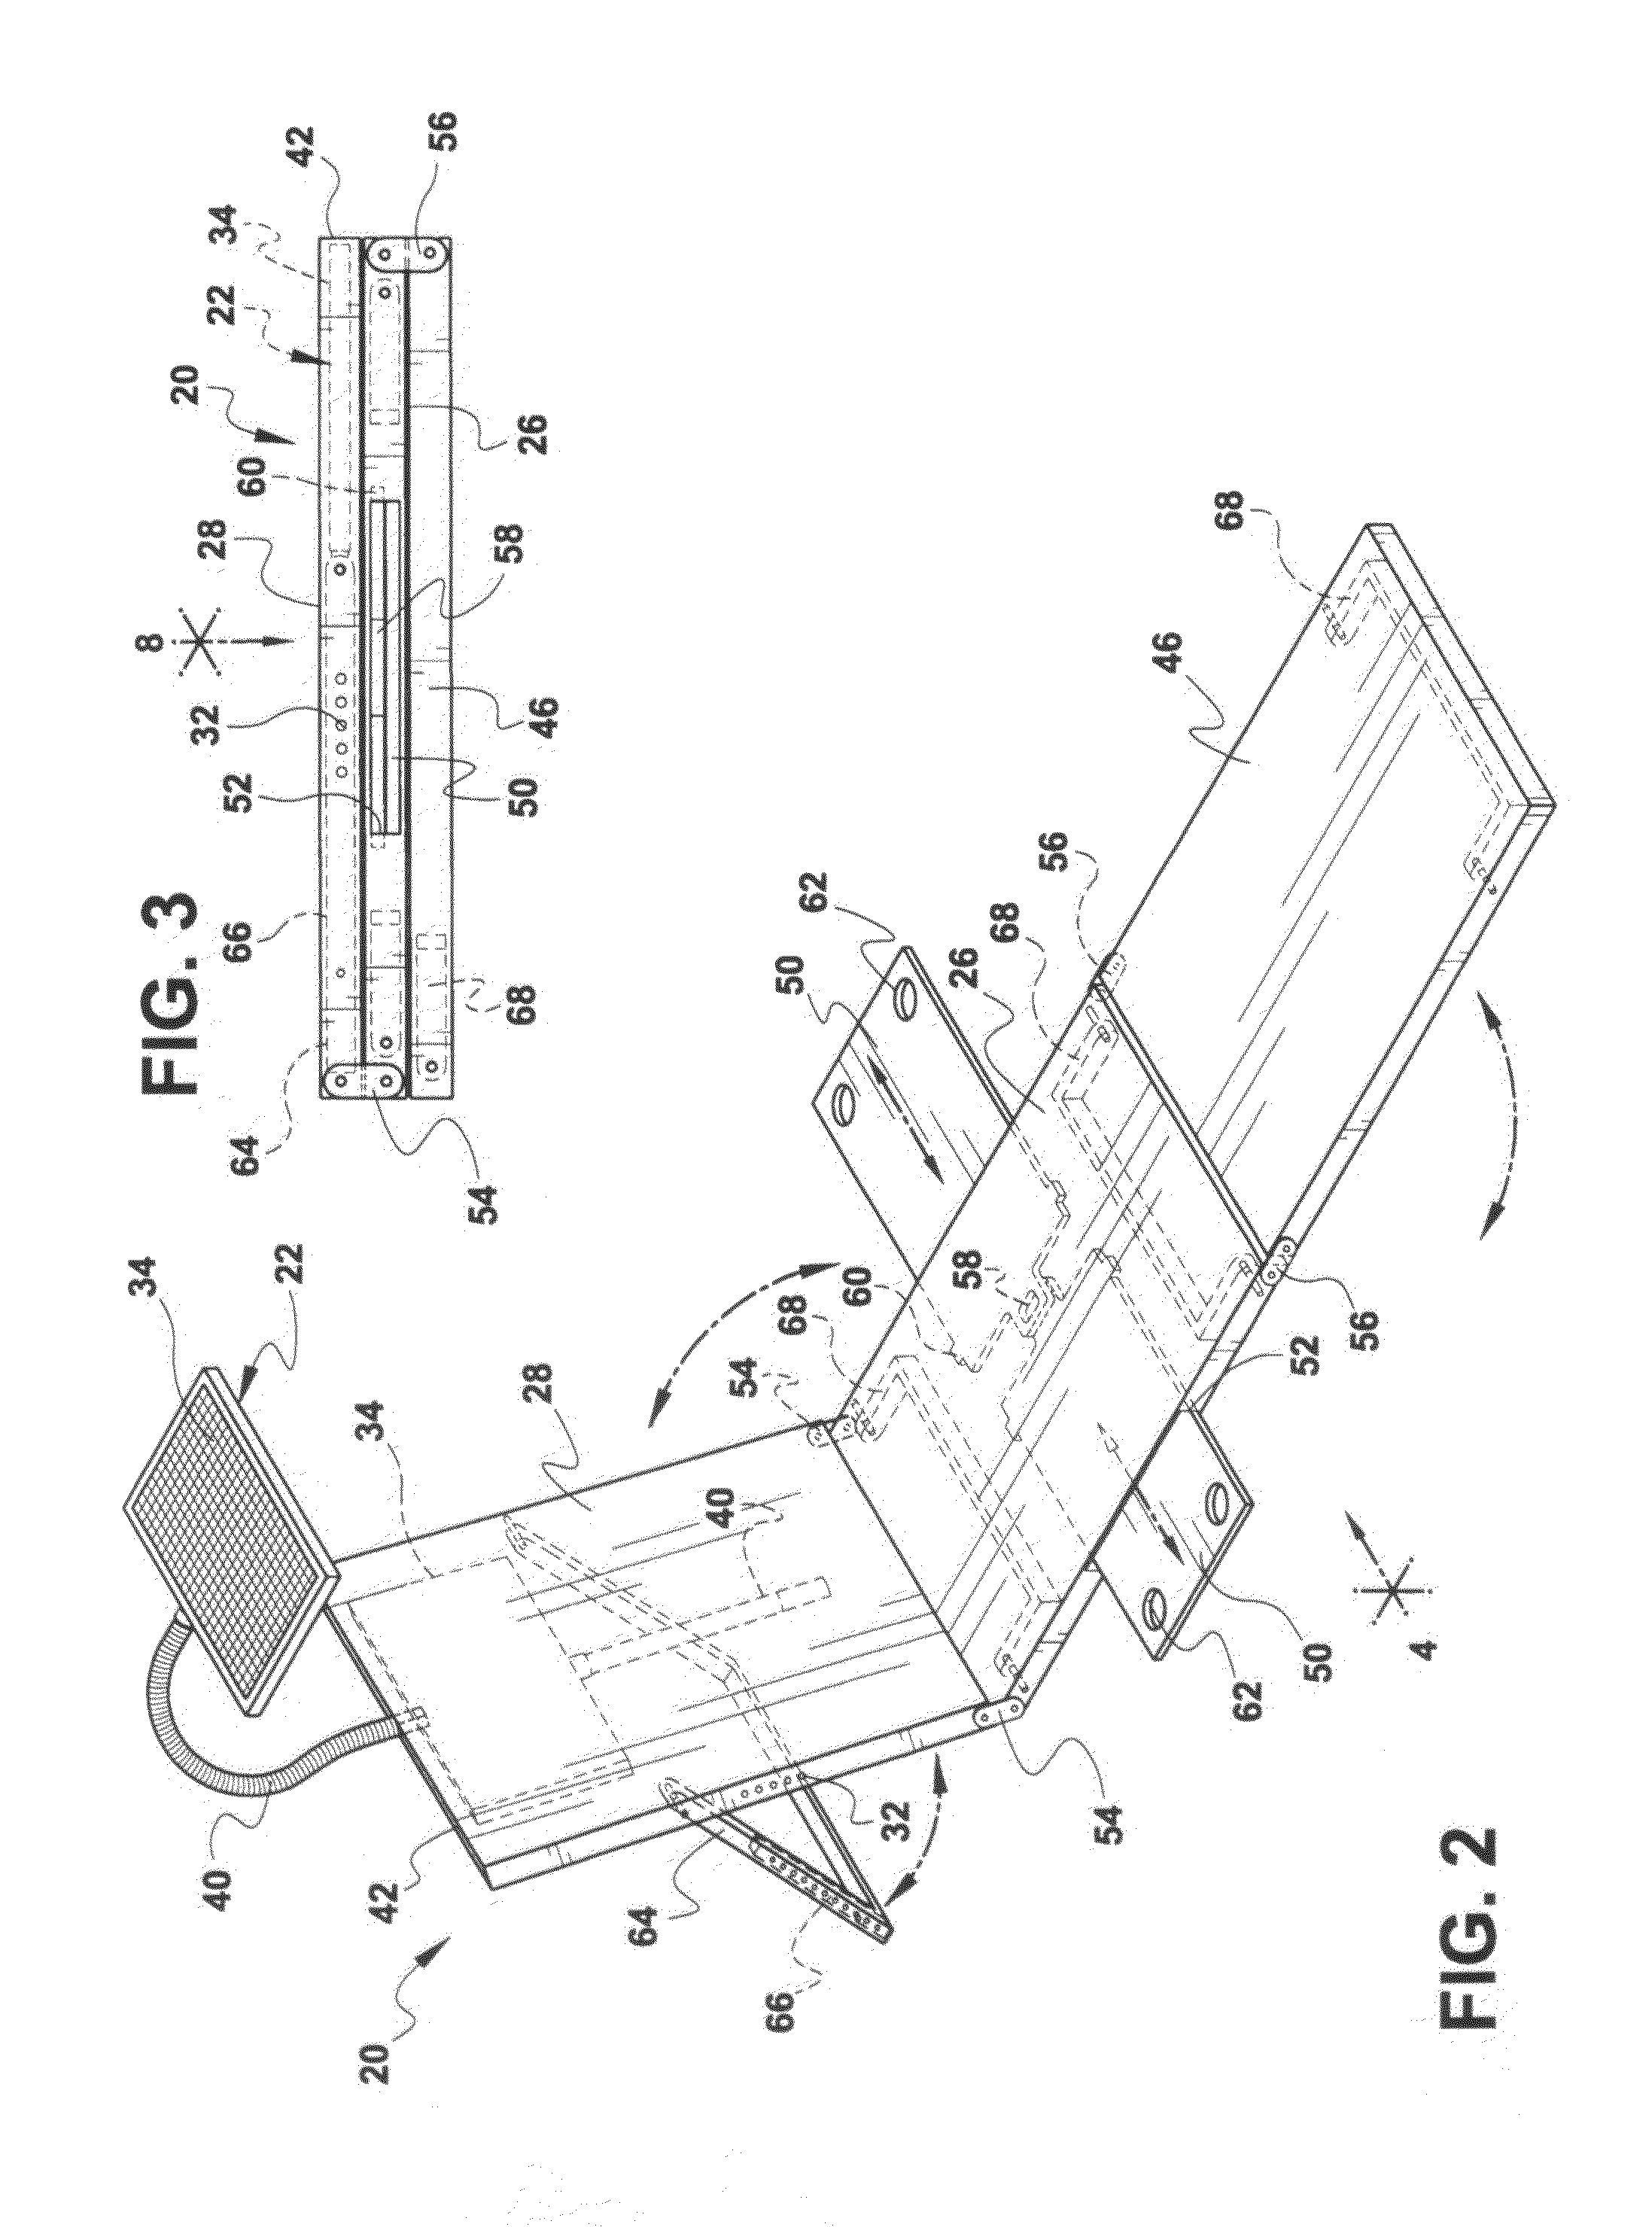 Chair provision with an apparatus for converting solar energy to power electrical devices